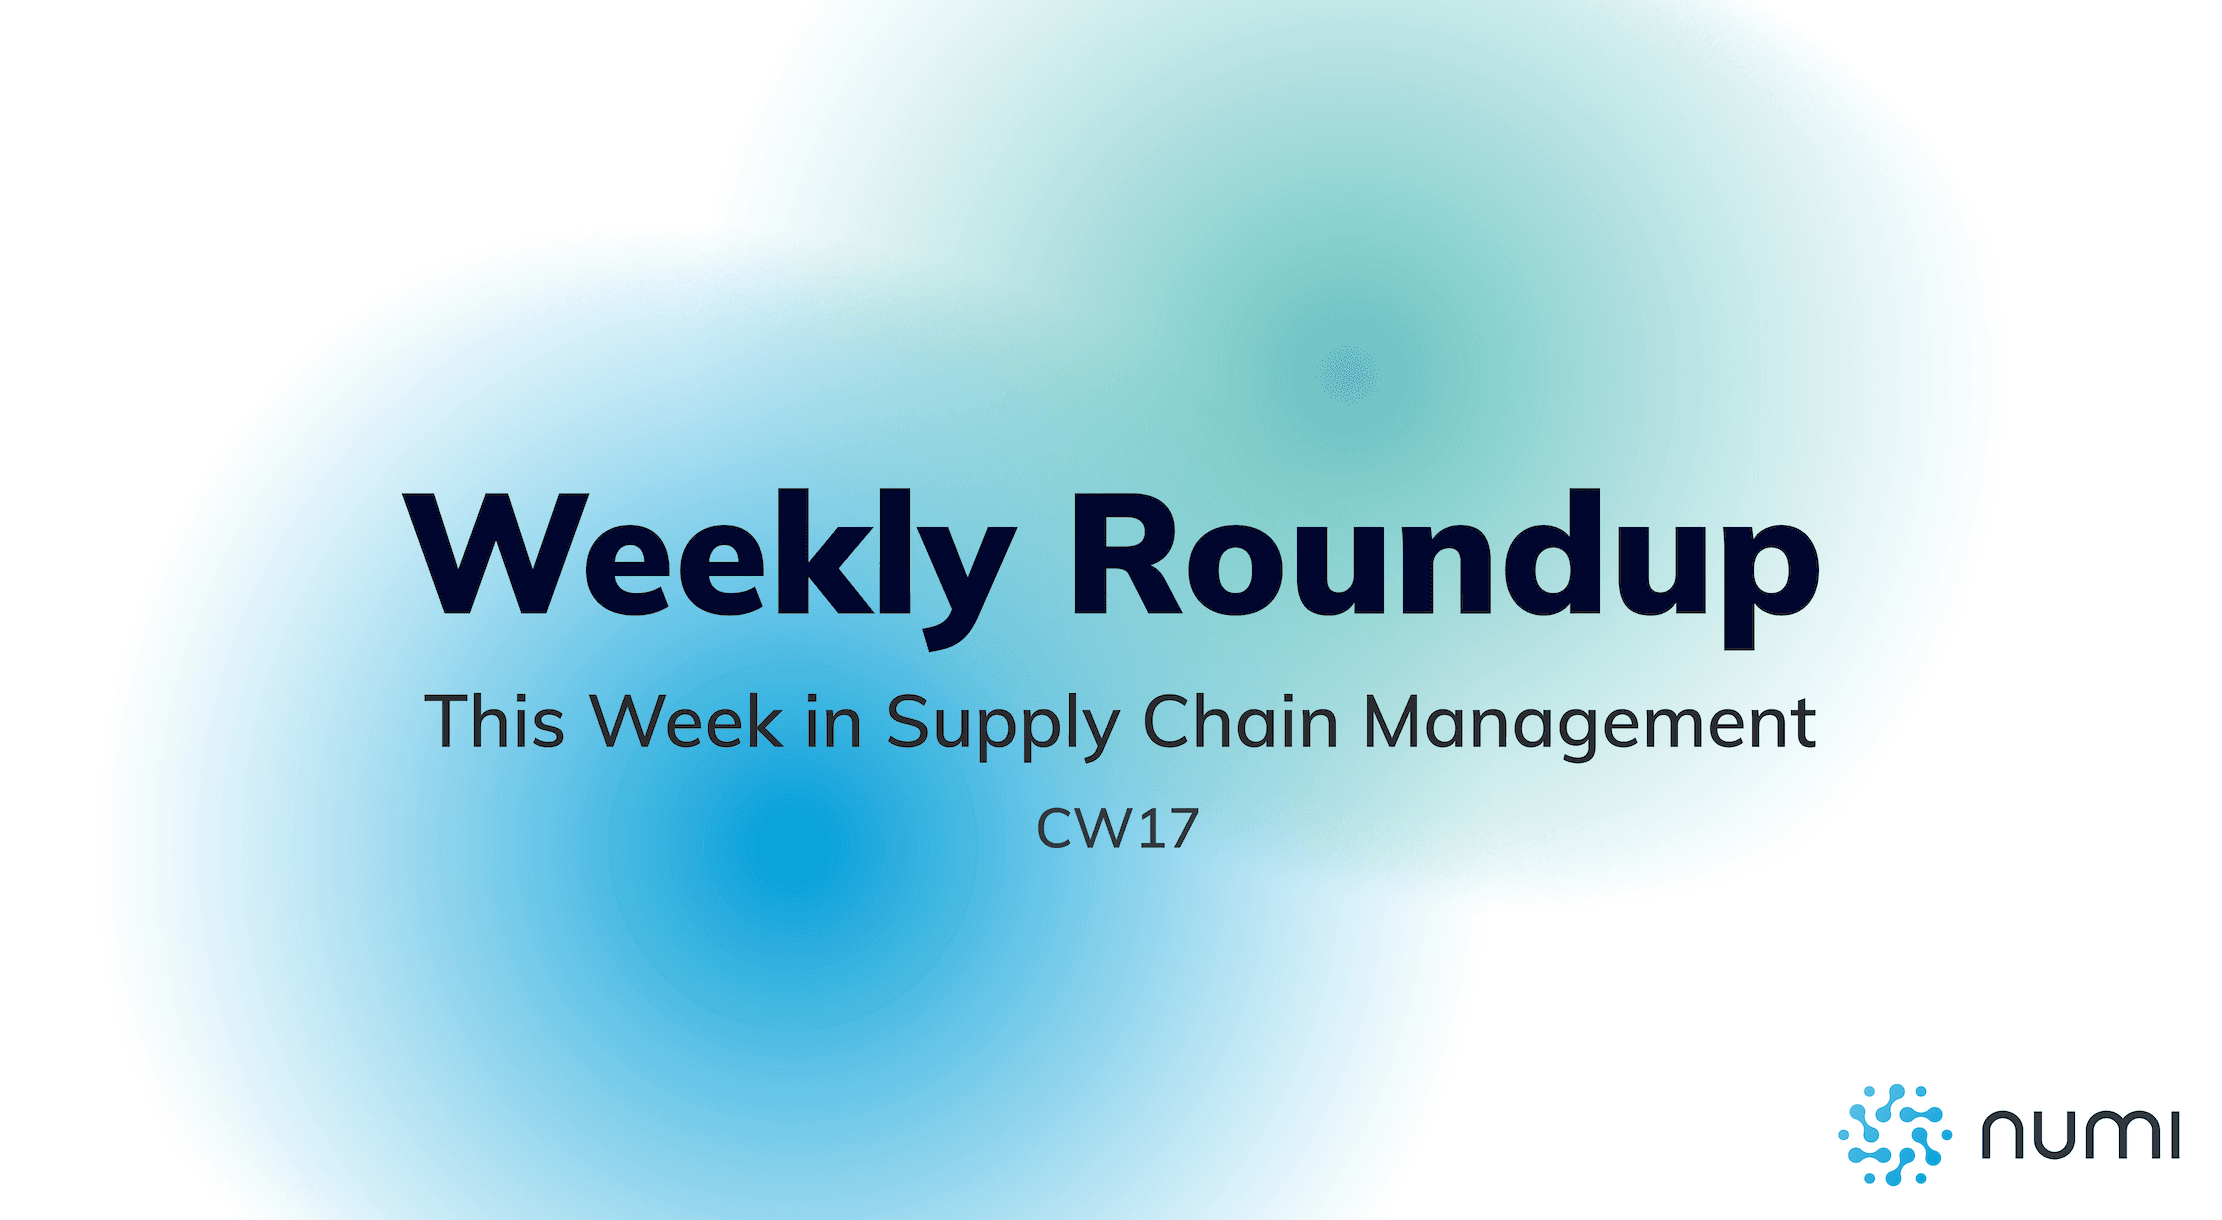 Weekly Roundup - Rainy Season Benefits, Lightweight AI Model and New Business Audit Law